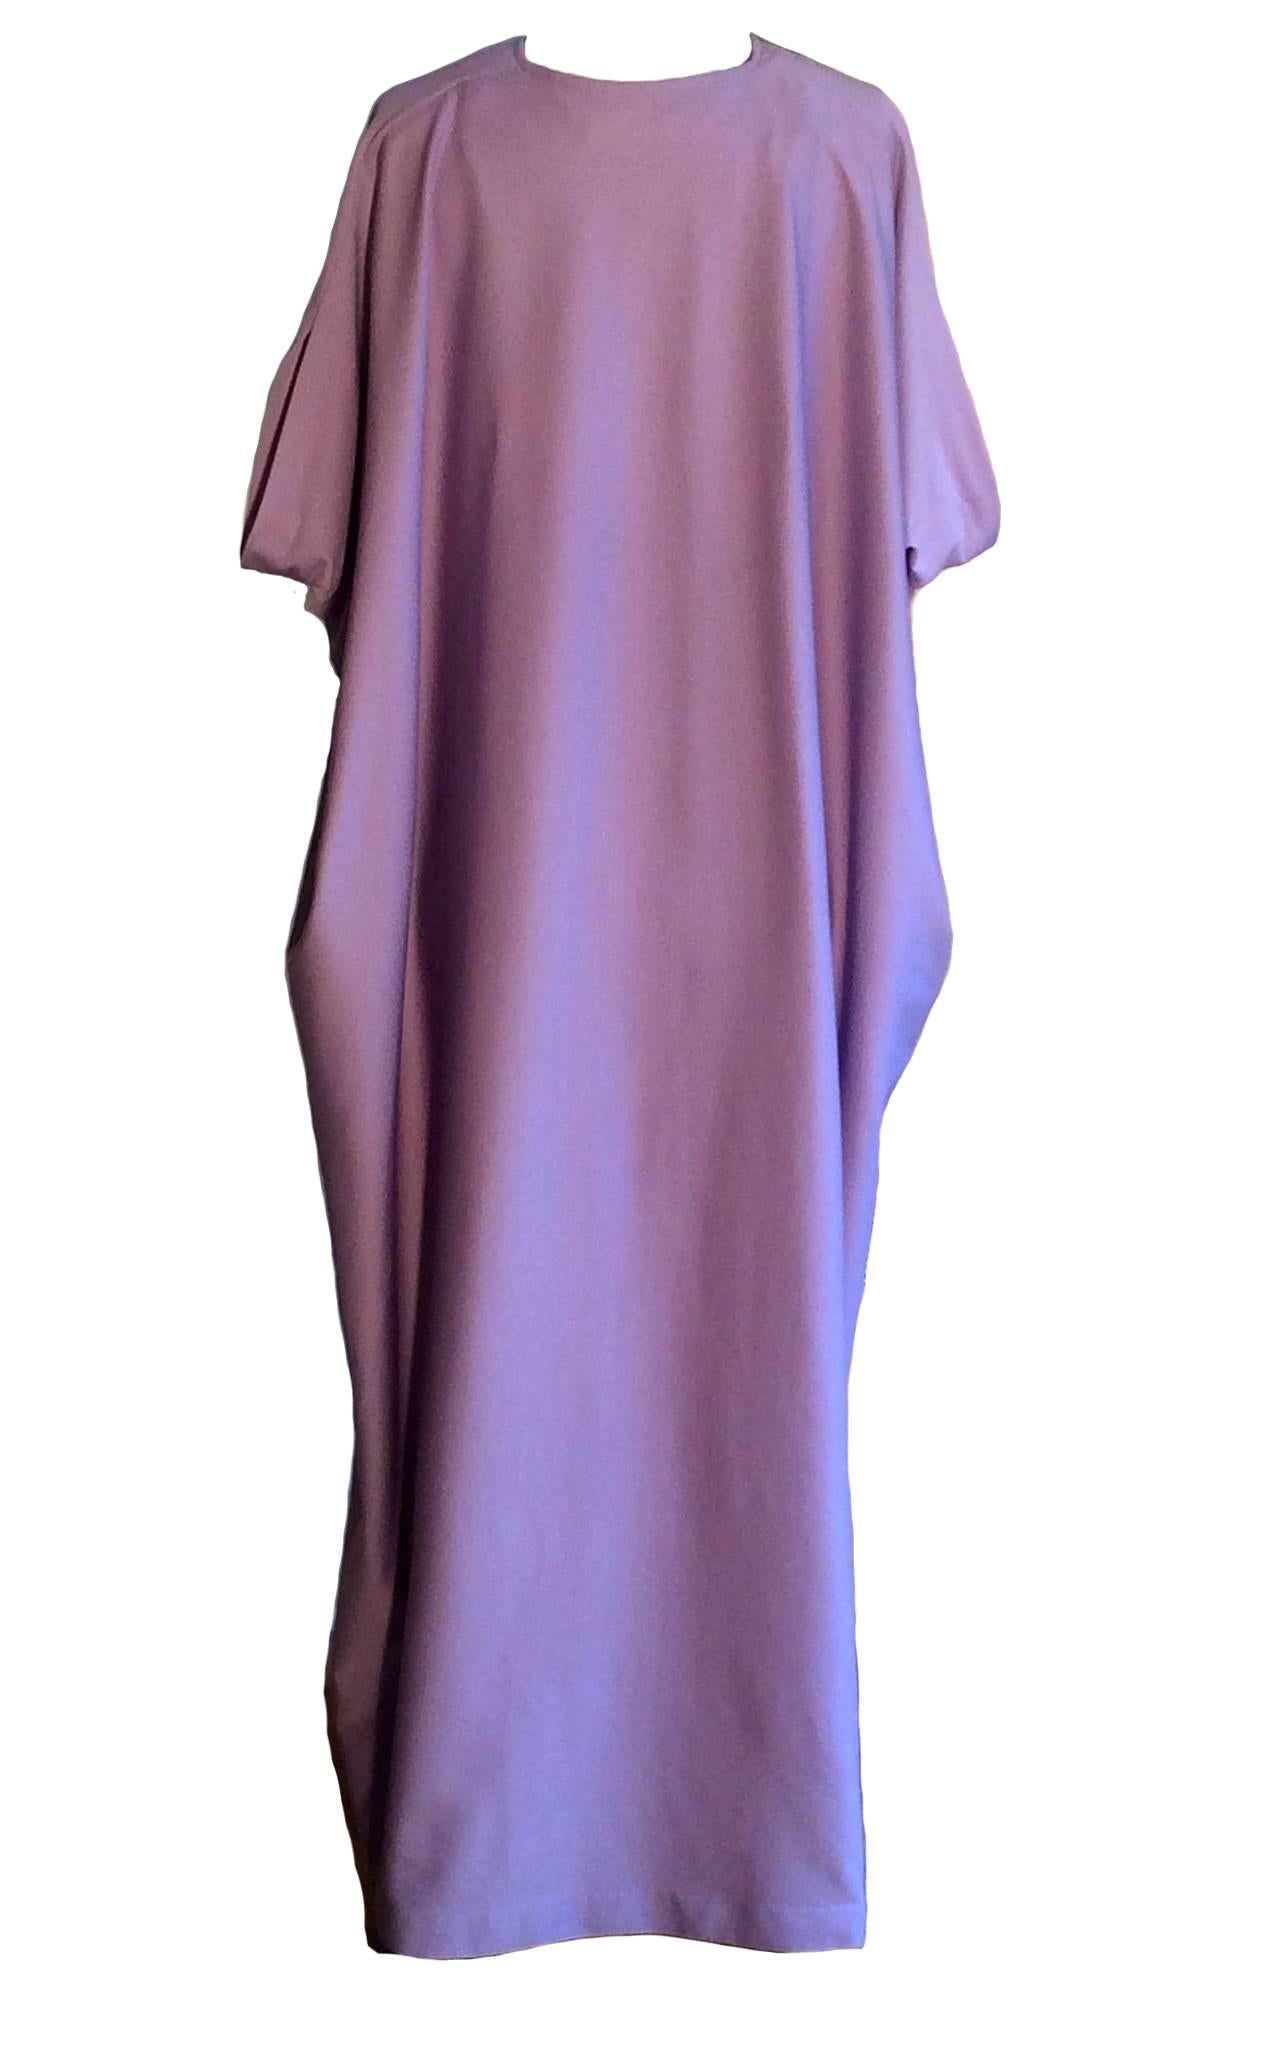 Halston IV 1970's lavender caftan. A fun example of Halston's later design-for-the-masses. Made of a very cool knit fabric that feels like a super-light neoprene. A great cover up for pool side lounging, just add some big shades!

One size fits